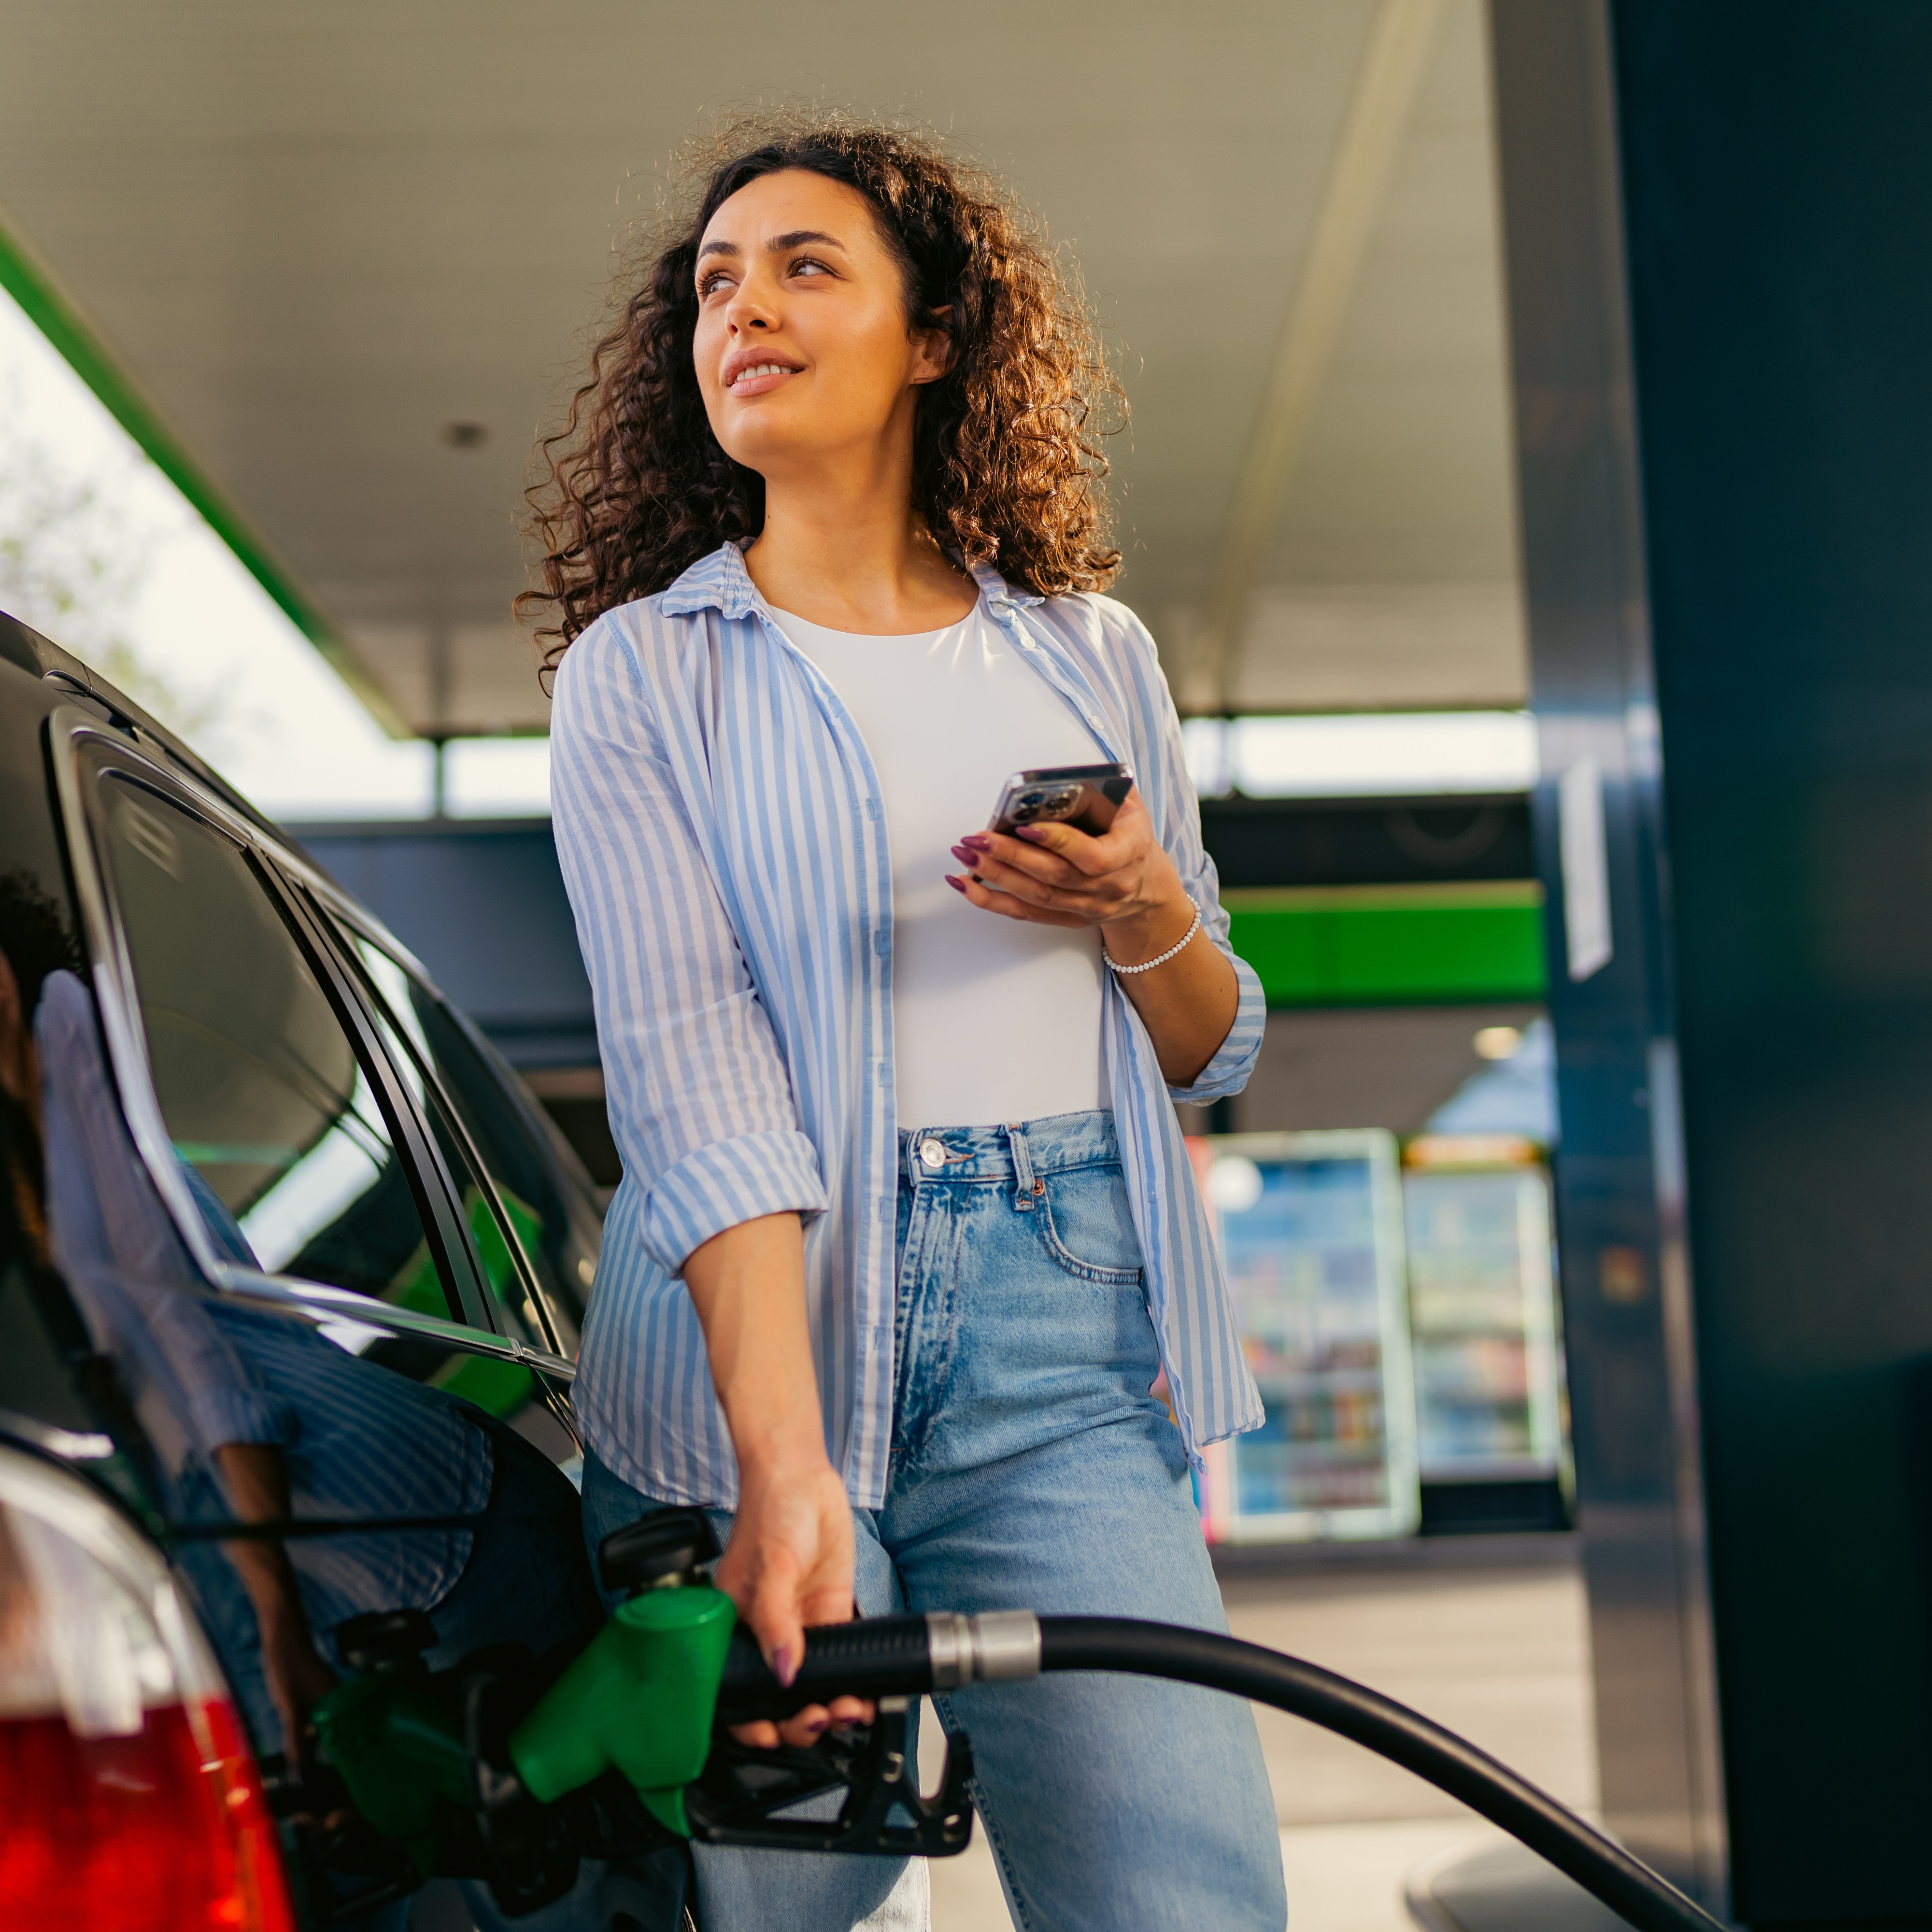 National average rises while New York drivers see a decline in prices at the pump